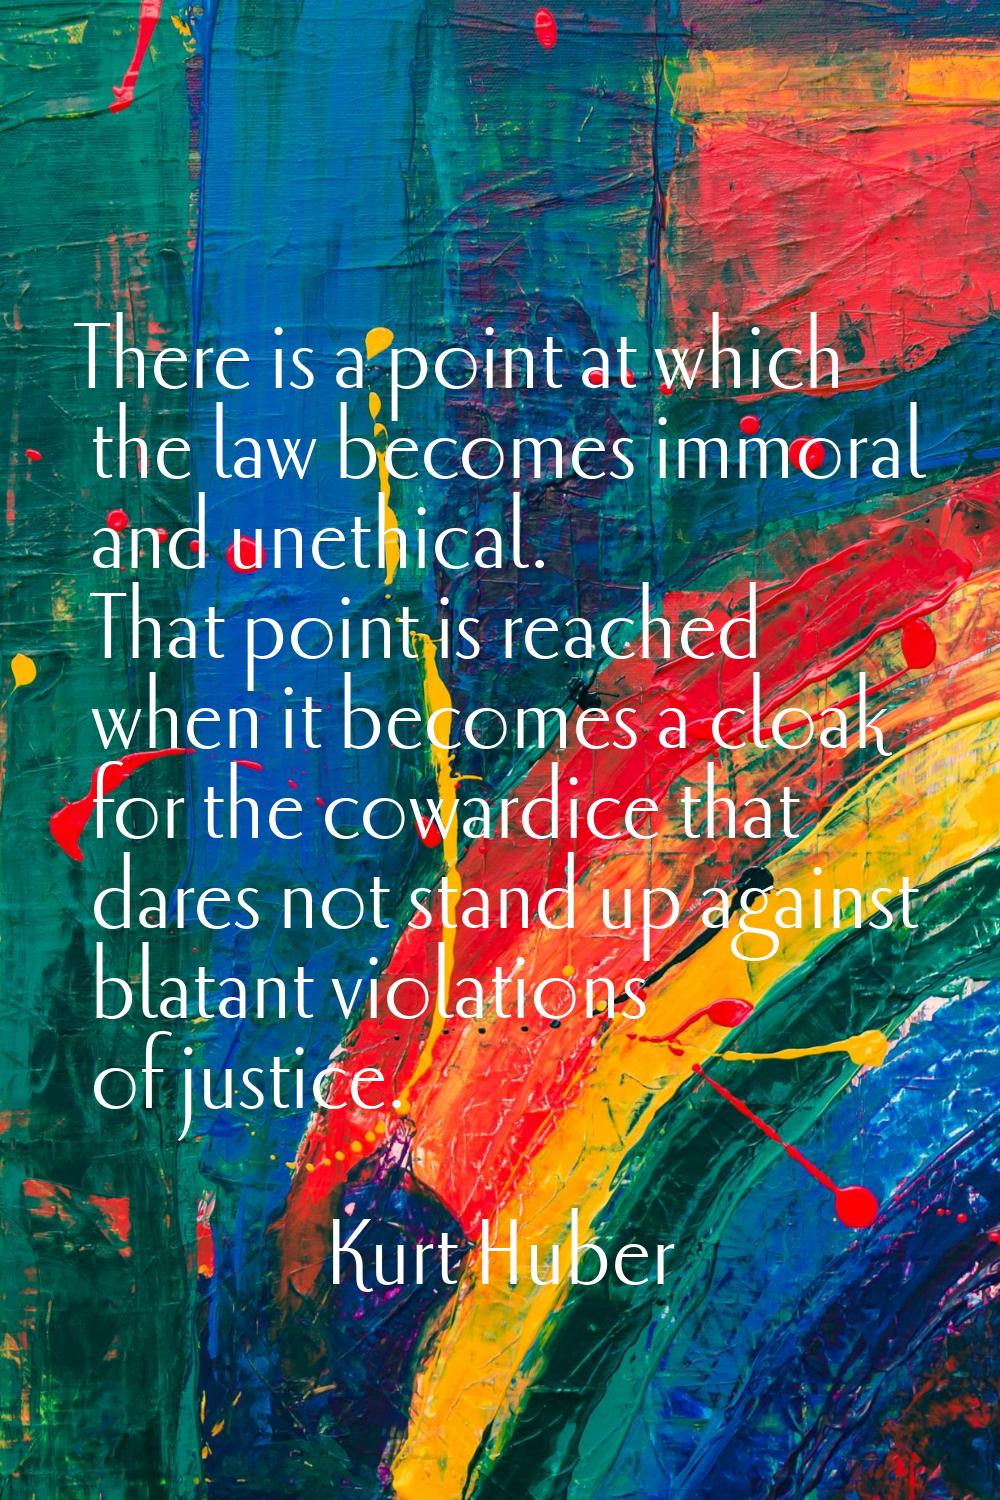 There is a point at which the law becomes immoral and unethical. That point is reached when it beco